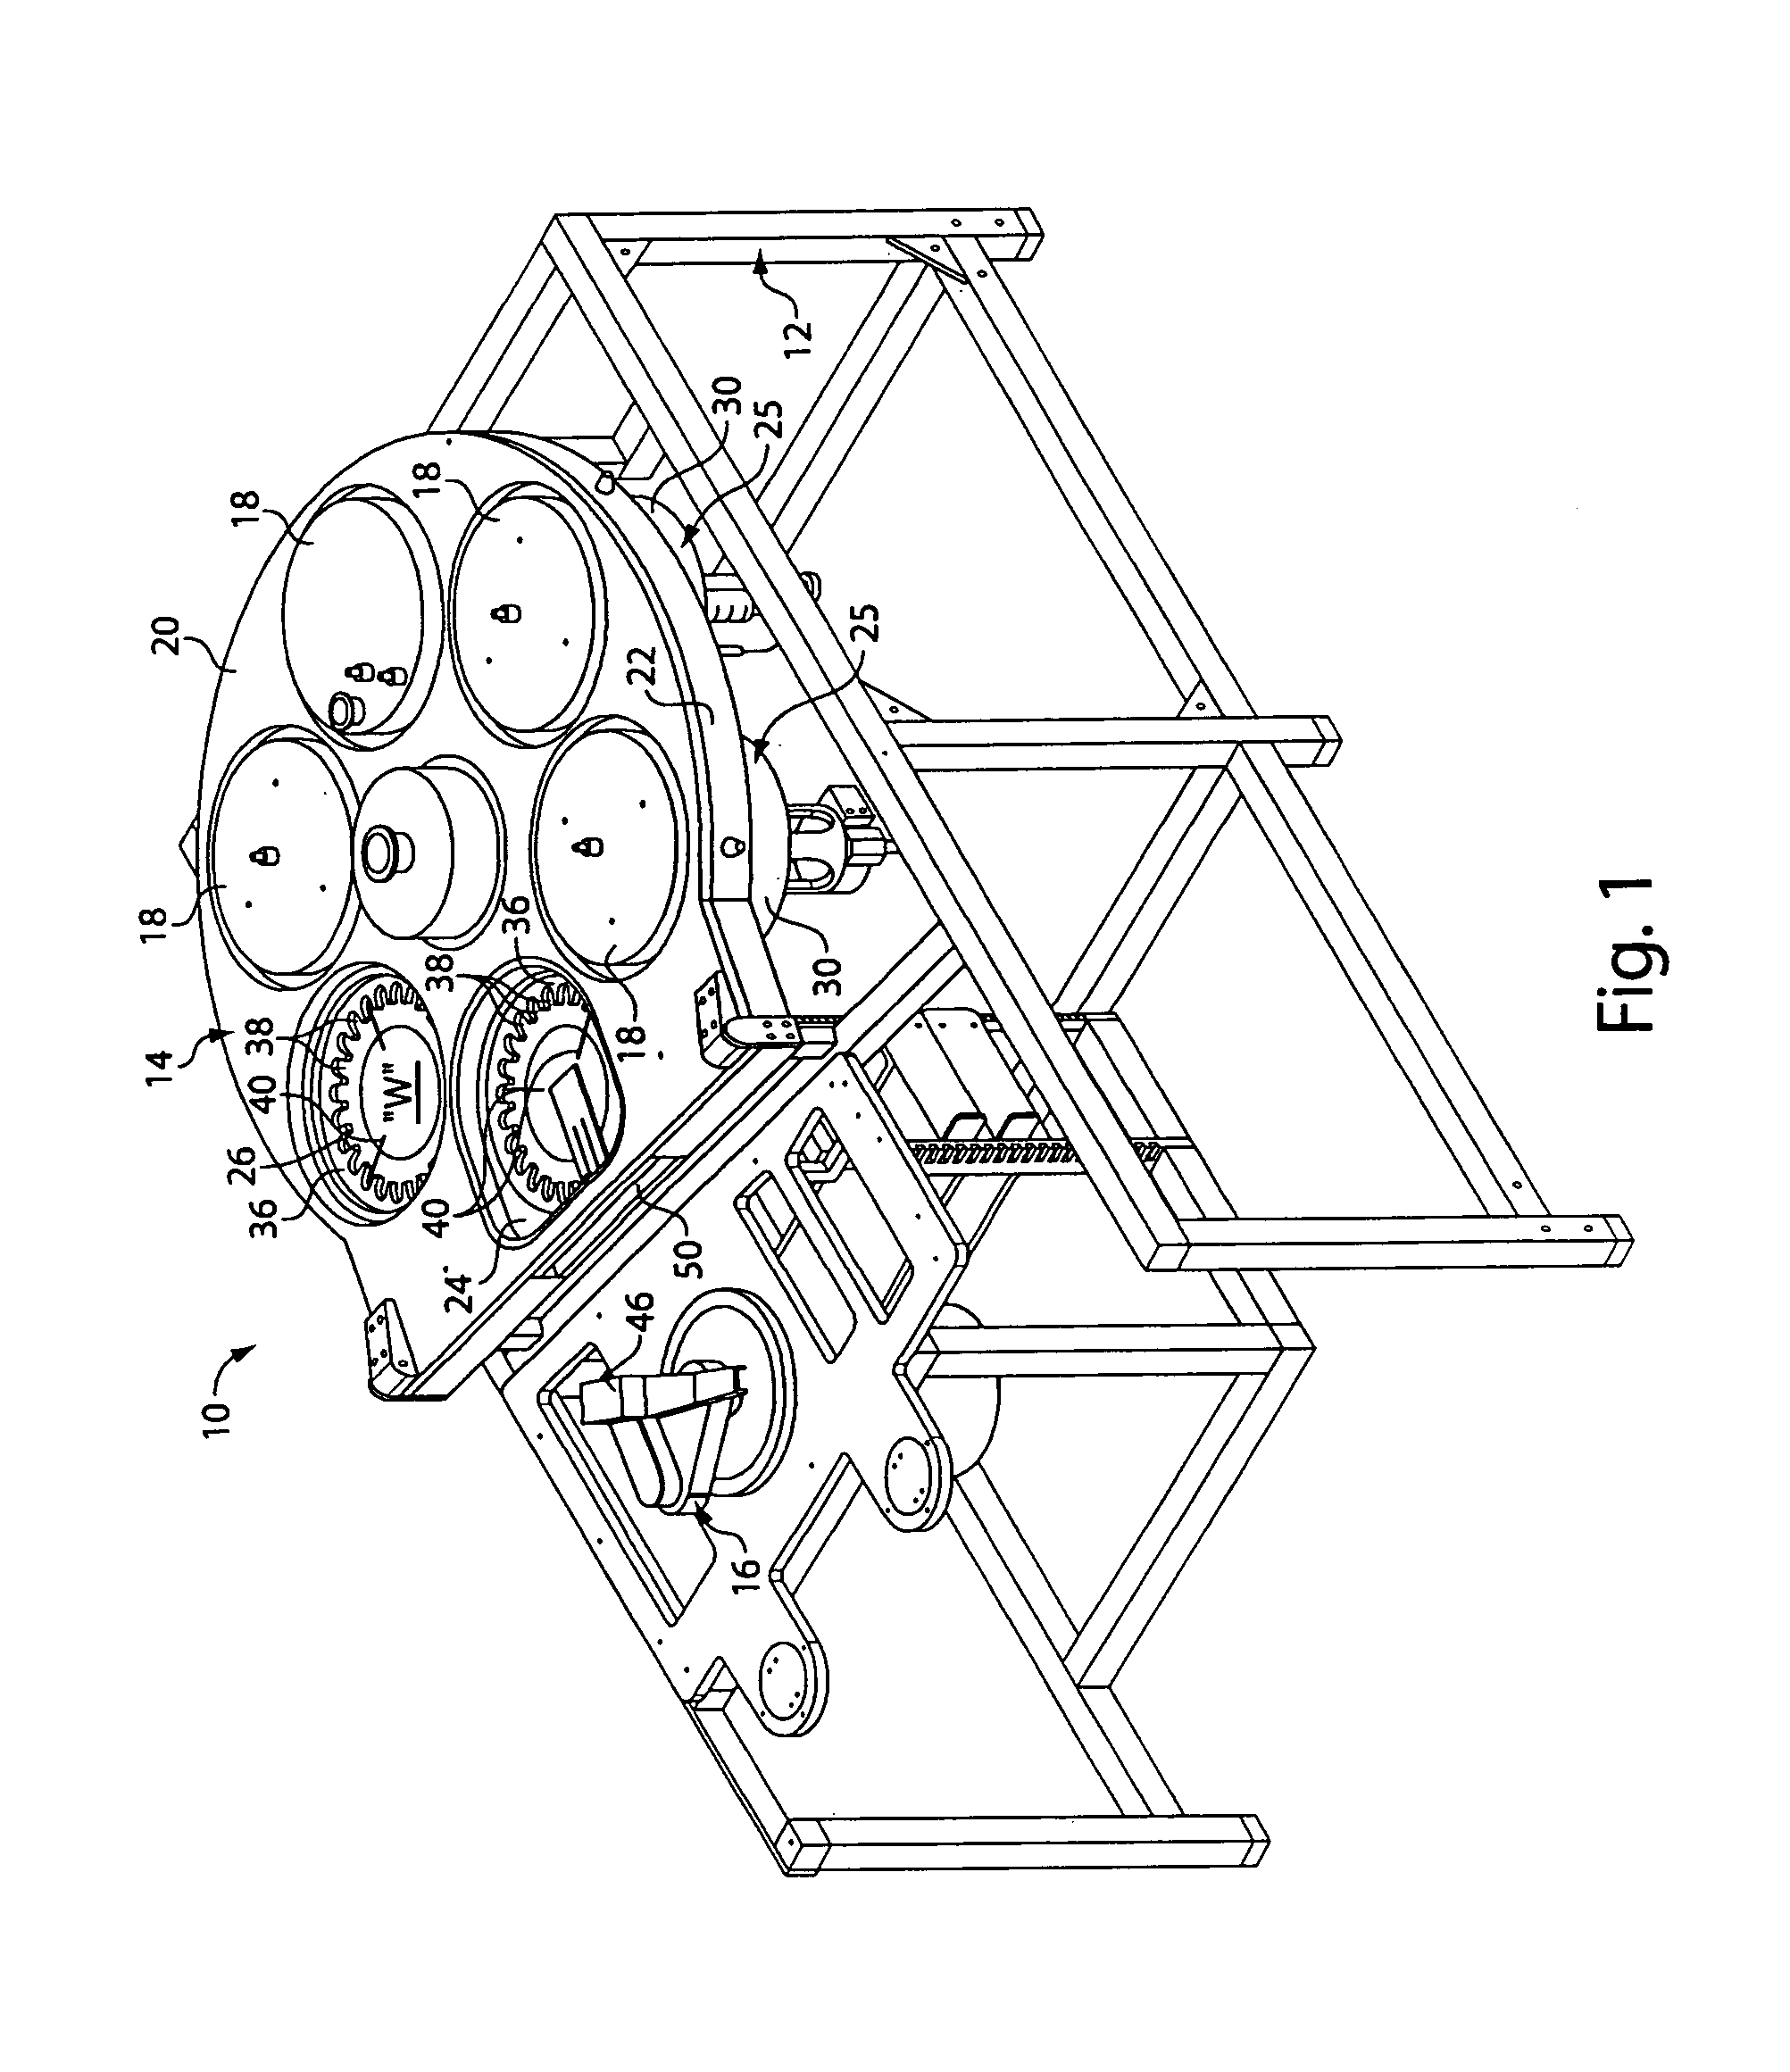 Isolation chamber arrangement for serial processing of semiconductor wafers for the electronic industry